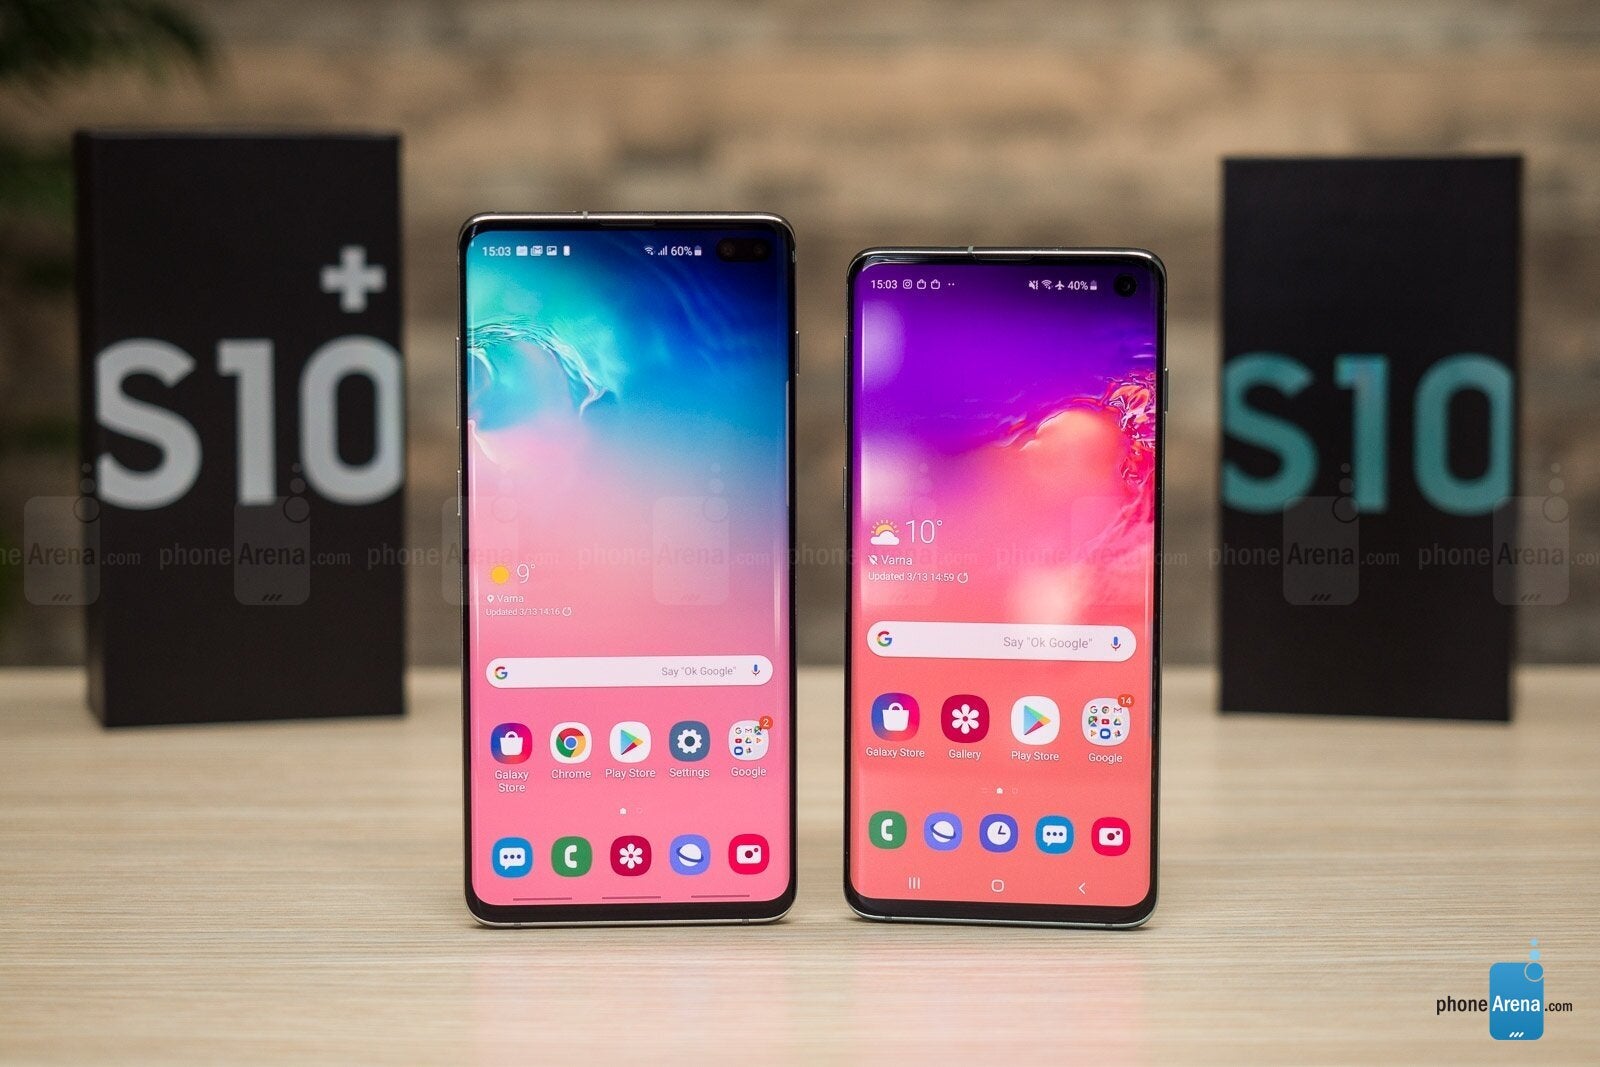 The Galaxy S10 was not as popular as the Note 10 seems to be - Galaxy Note 10 sales exceed expectations, crushing all Galaxy S and Note records in one country